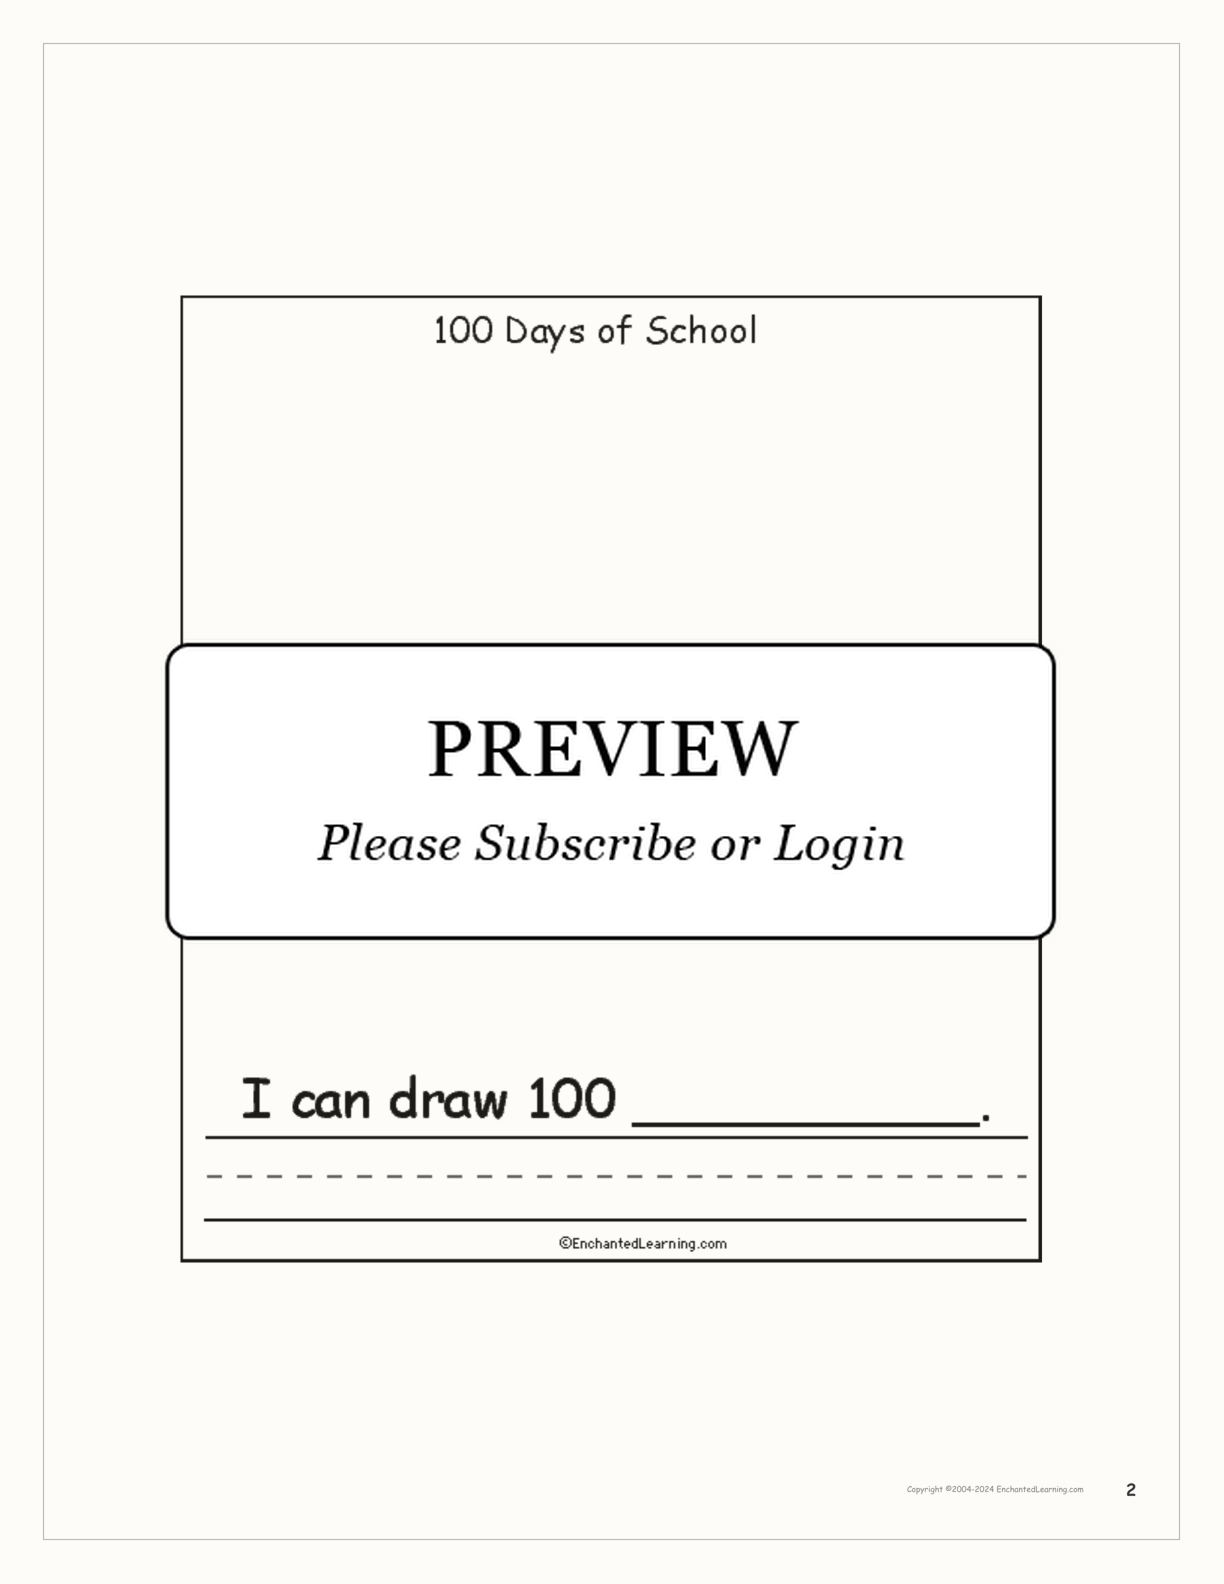 100 Days of School interactive worksheet page 2